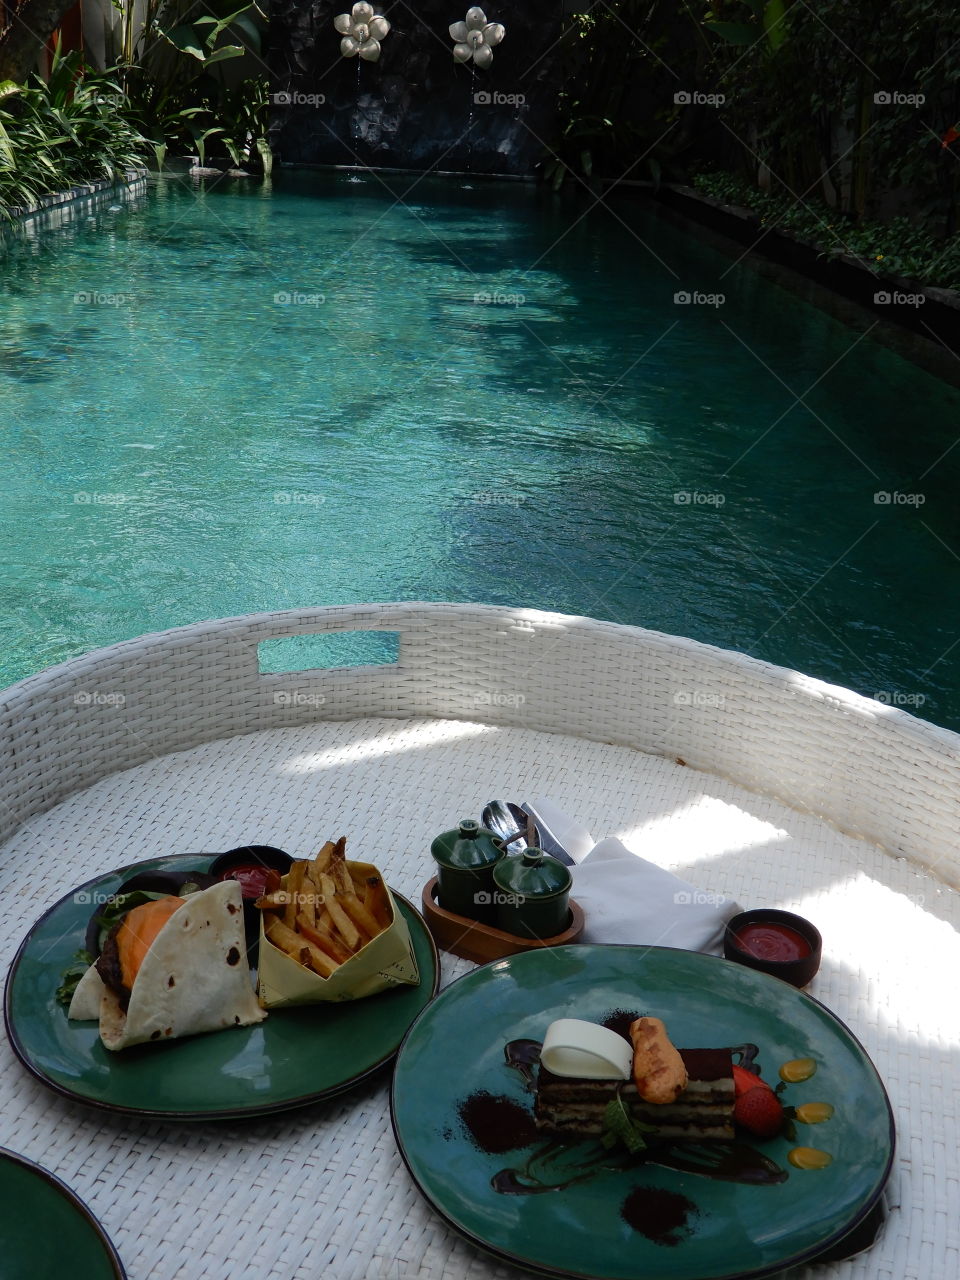 Today do something for you. For example have a delicious floating lunch in your private pool. 